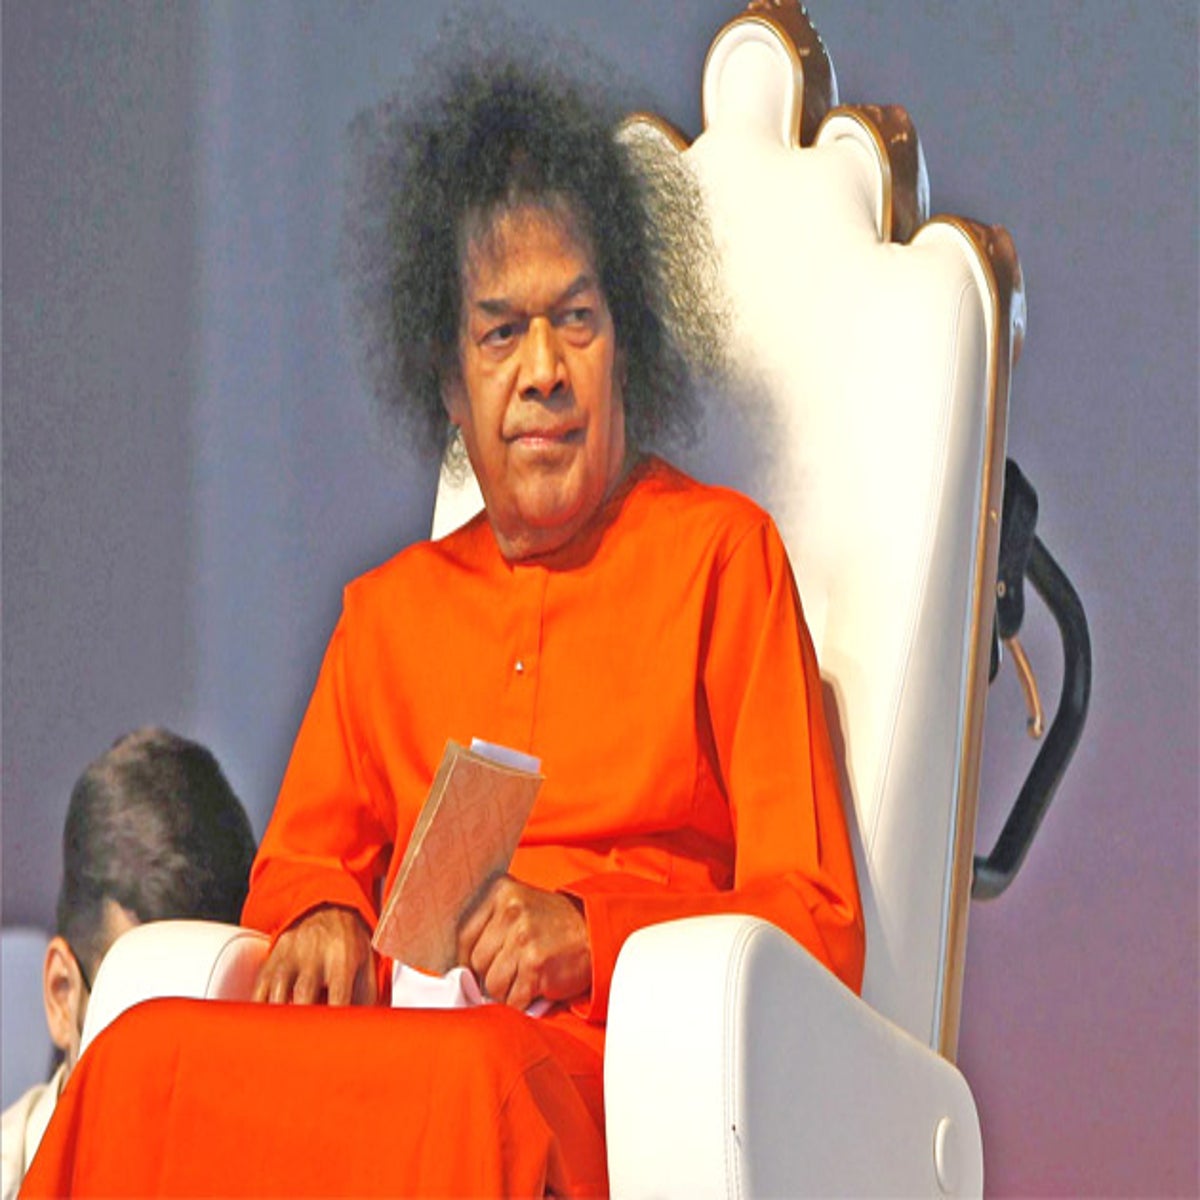 Sathya Sai Baba: Guru and philanthropist who was revered by millions but  whose career was dogged by controversy | The Independent | The Independent